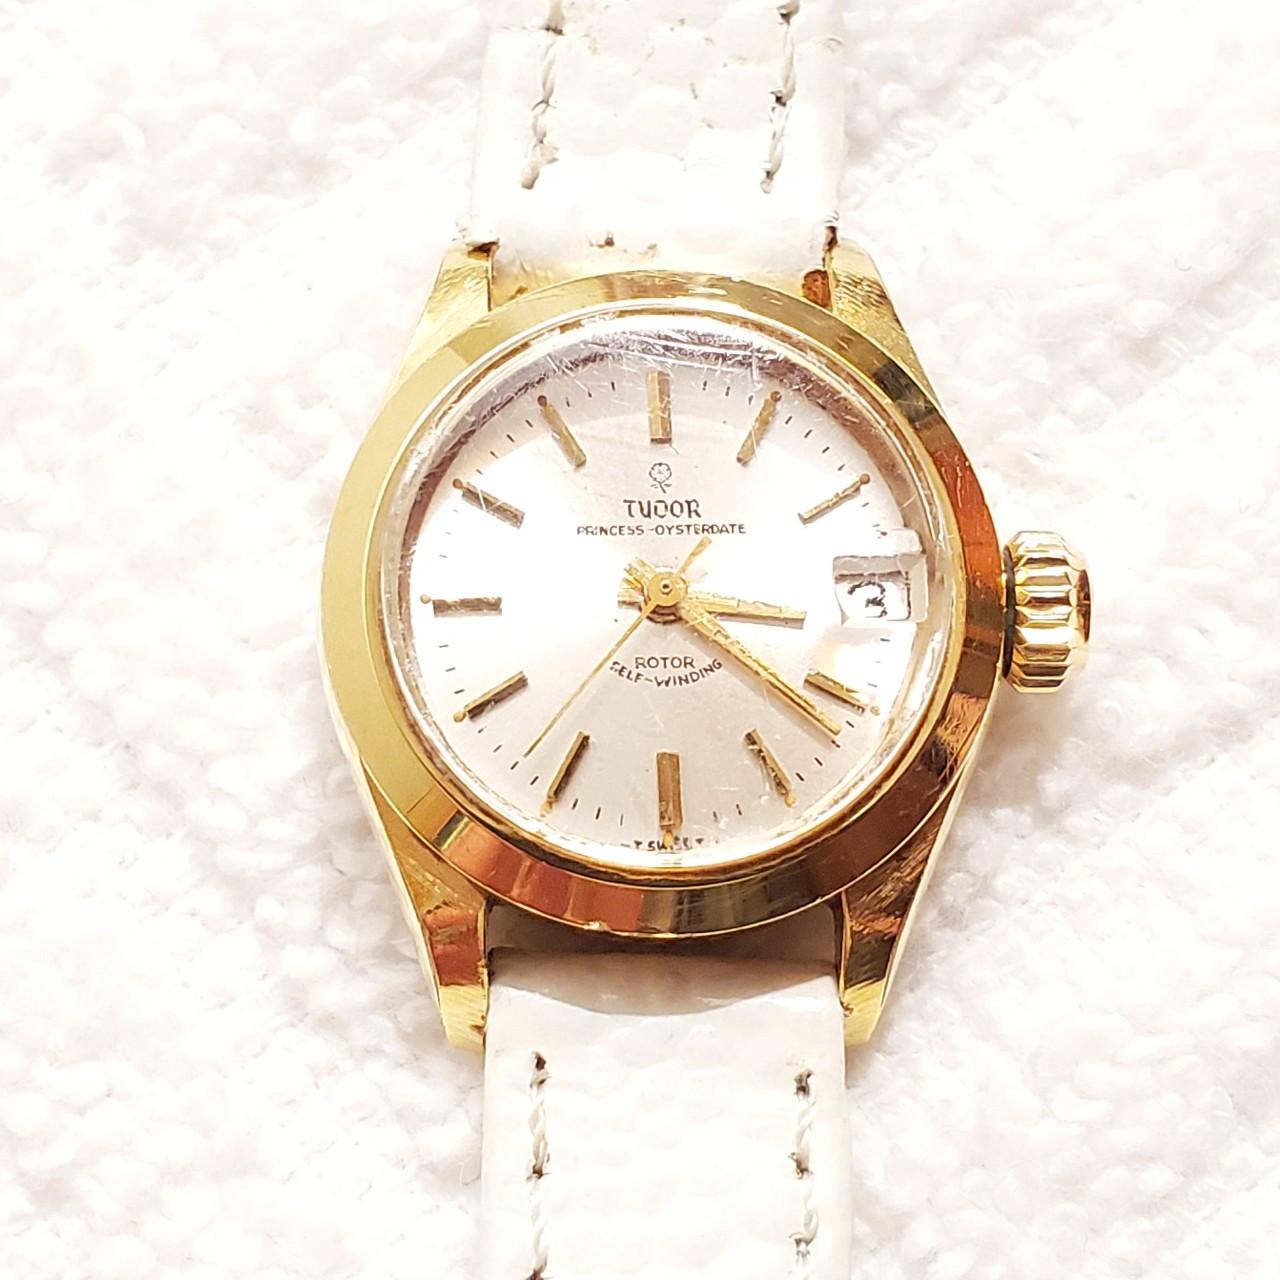 Rolex Women's White and Gold Watch